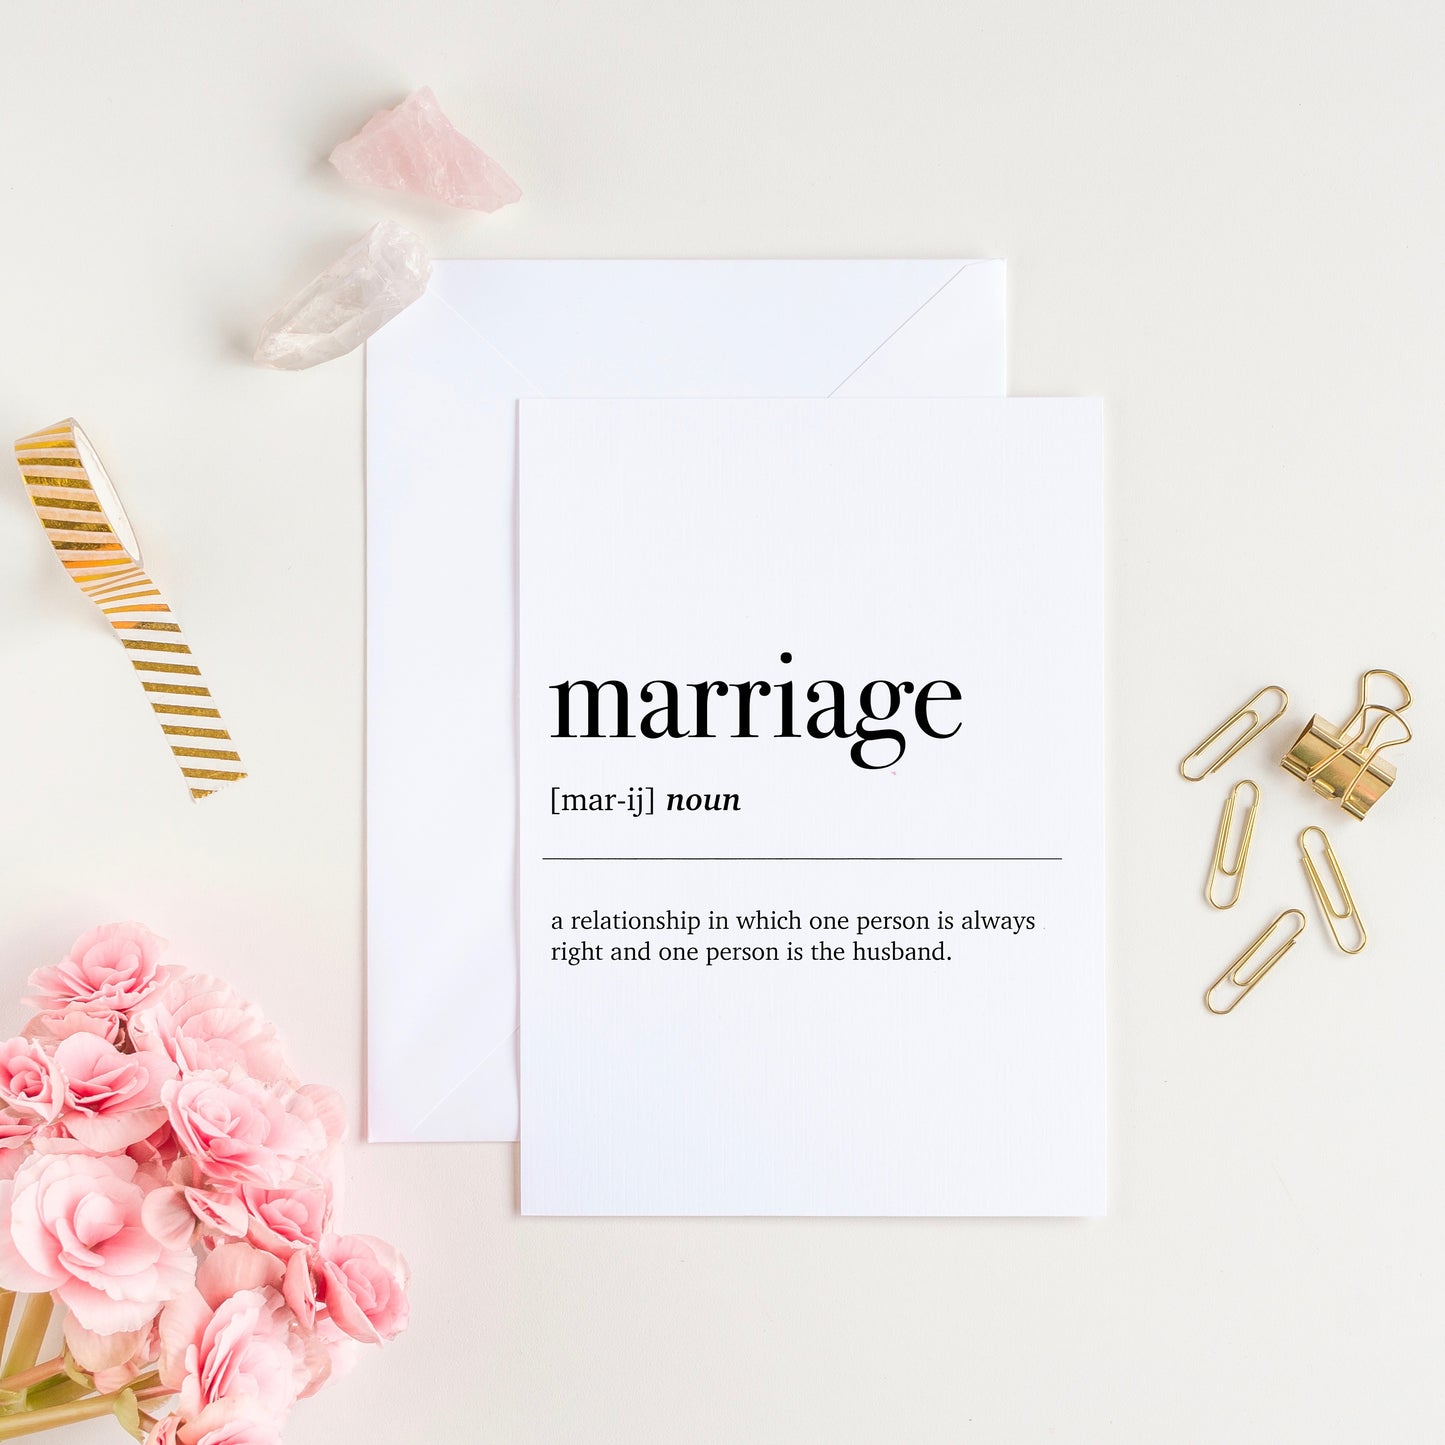 Marriage Dictionary Definition Card